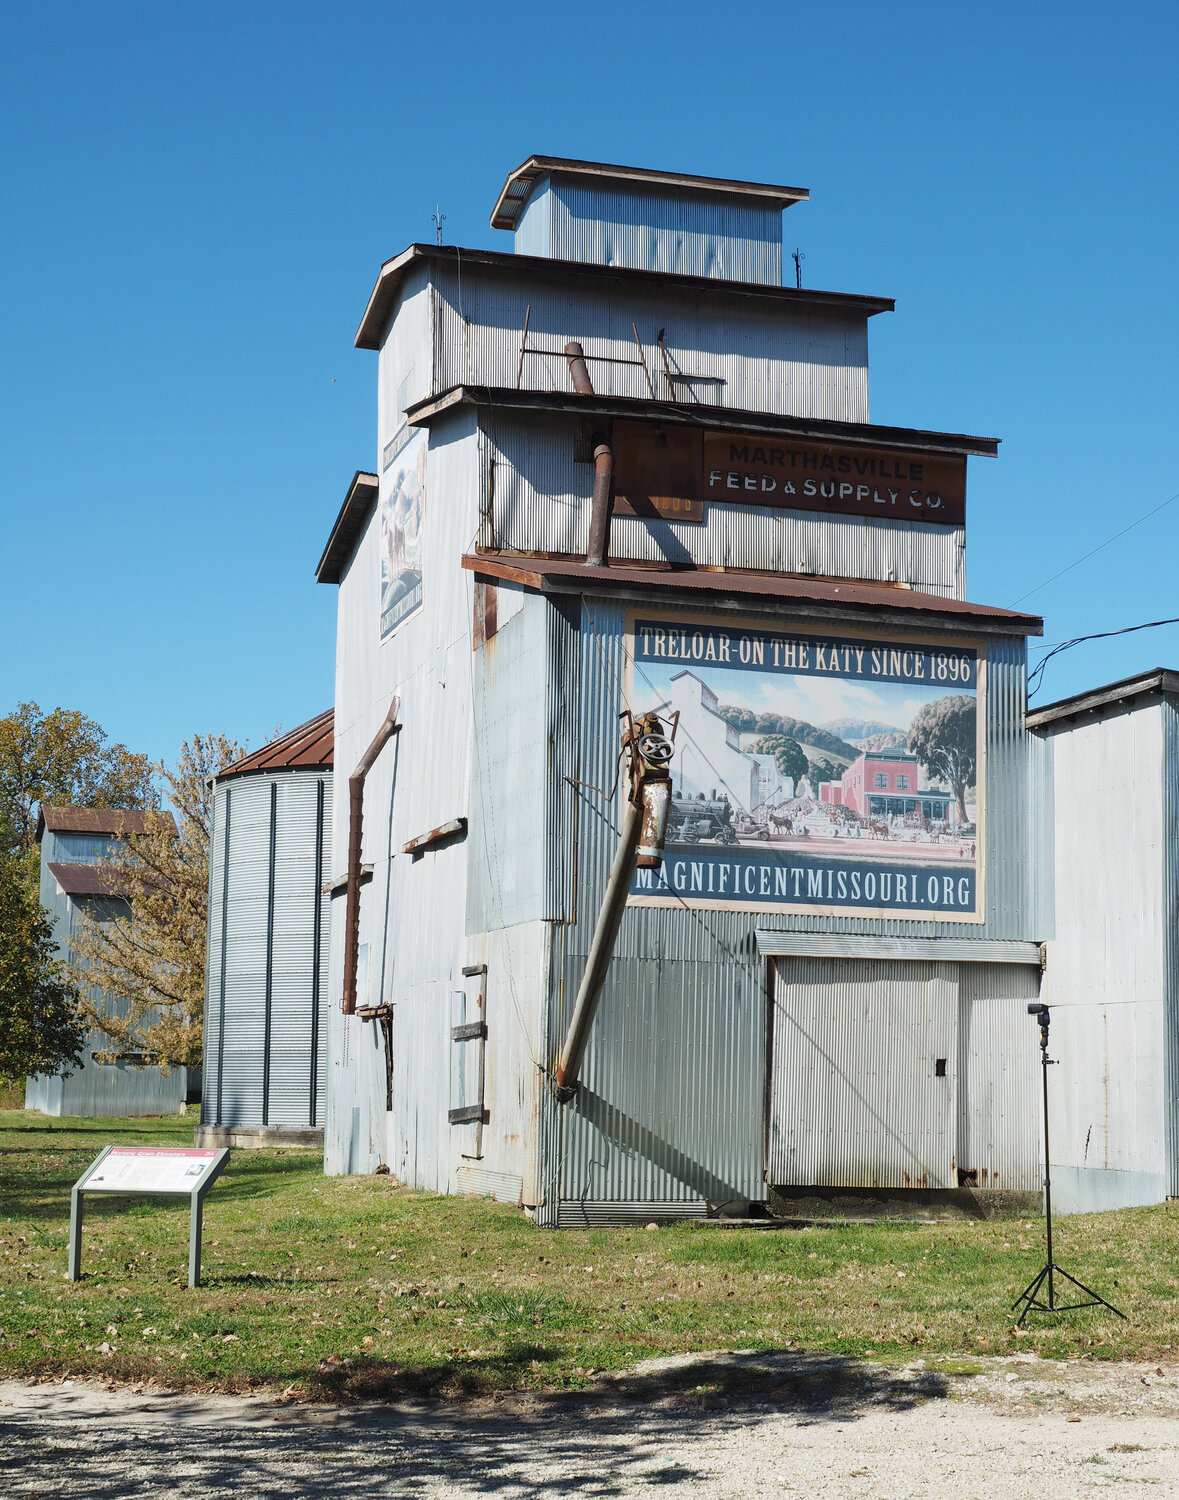 The Treloar Trailhead is the location of the century-old grain elevator and the historic Treloar Mercantile. On Sunday, Oct. 22, Magnificent Missouri held its 13th annual Elevator Party and tour of the mercantile. The mural on the elevator is by local artist Bryan Haynes